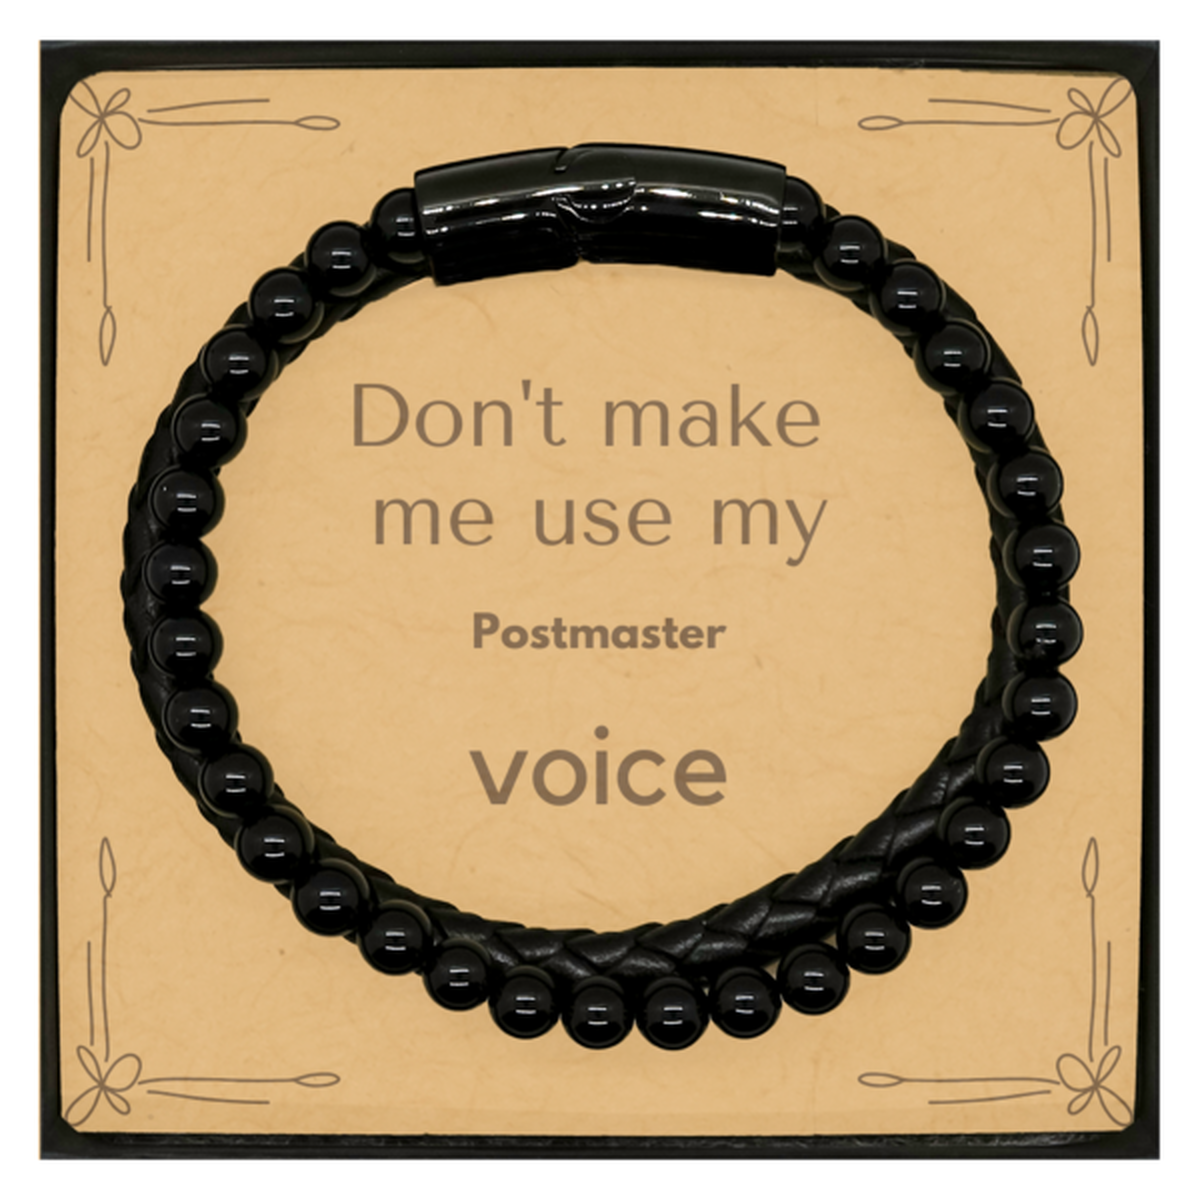 Don't make me use my Postmaster voice, Sarcasm Postmaster Card Gifts, Christmas Postmaster Stone Leather Bracelets Birthday Unique Gifts For Postmaster Coworkers, Men, Women, Colleague, Friends